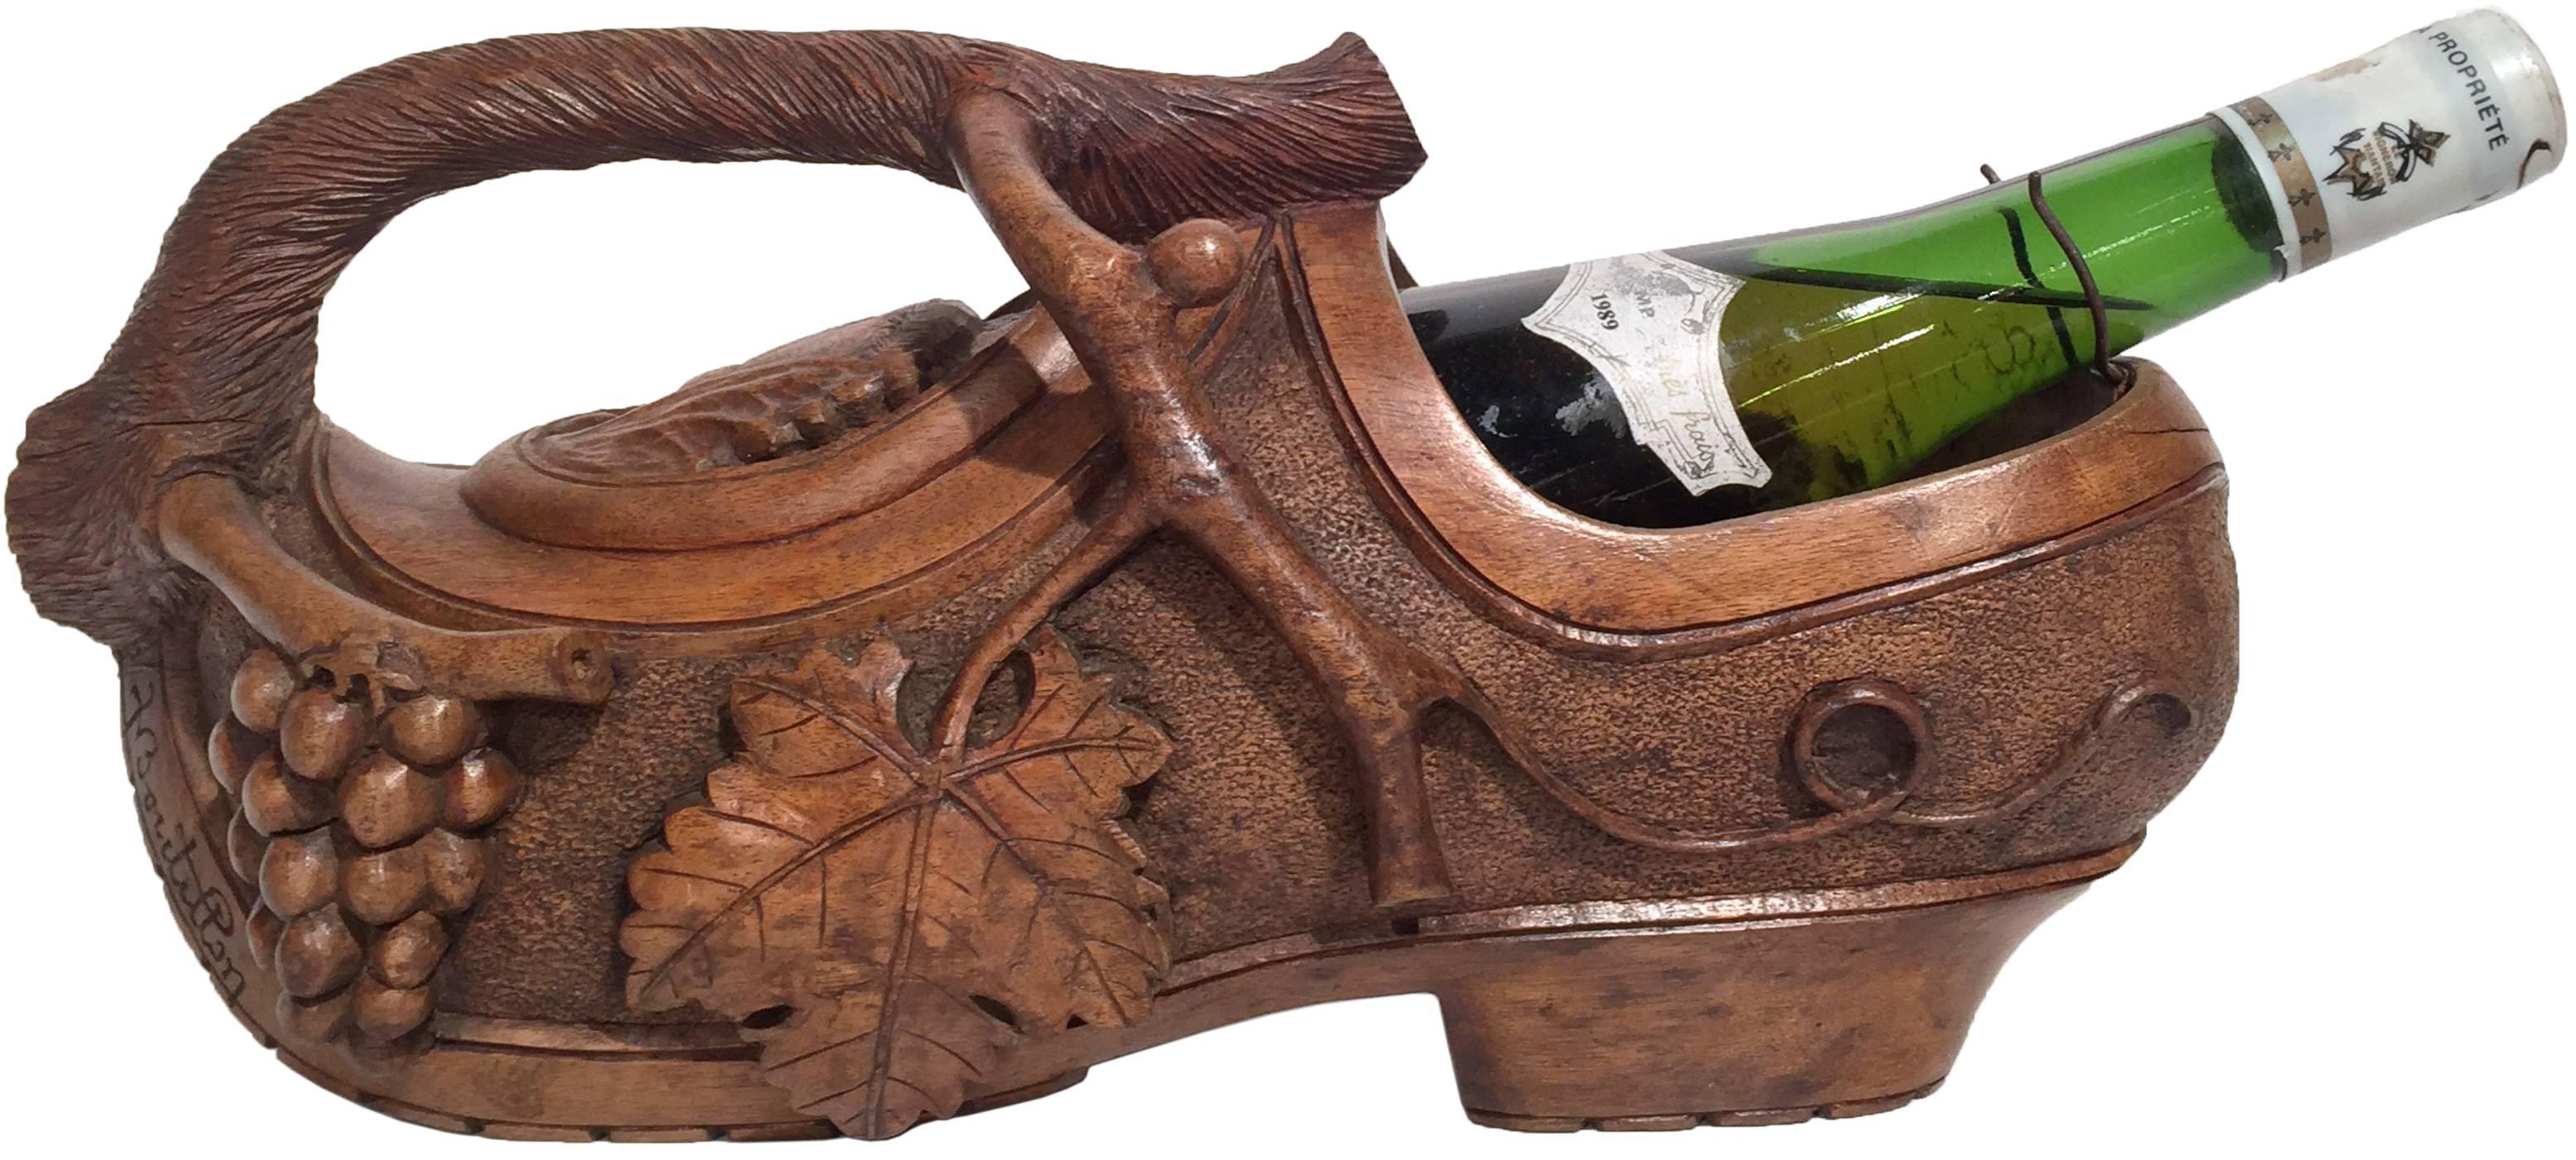 Impress your guests with this interesting antique wine bottle holder shaped as a clog shoe; crafted in France, circa 1920, the unique, hand carved bottle holder with handle shaped as vine, features high relief foliage decor throughout. The pouring